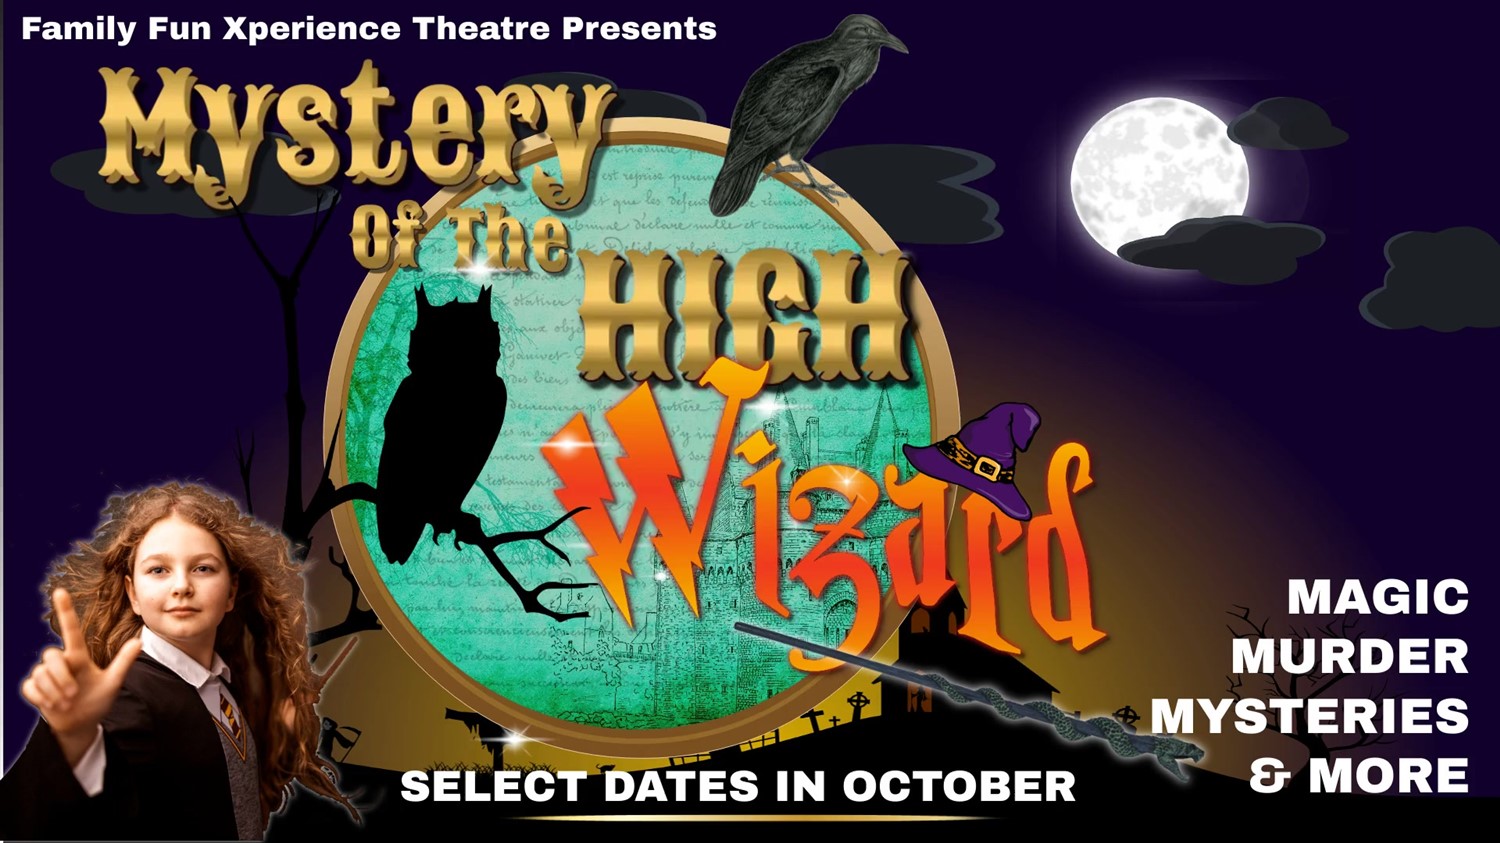 🗝 MYSTERY of the HIGH WIZARD⚡️ Magic, Murder, Mysteries, and More to solve! on oct. 21, 19:00@FFX Theatre - Pick a seat, Buy tickets and Get information on Family Fun Xperience tickets.ffxshow.org